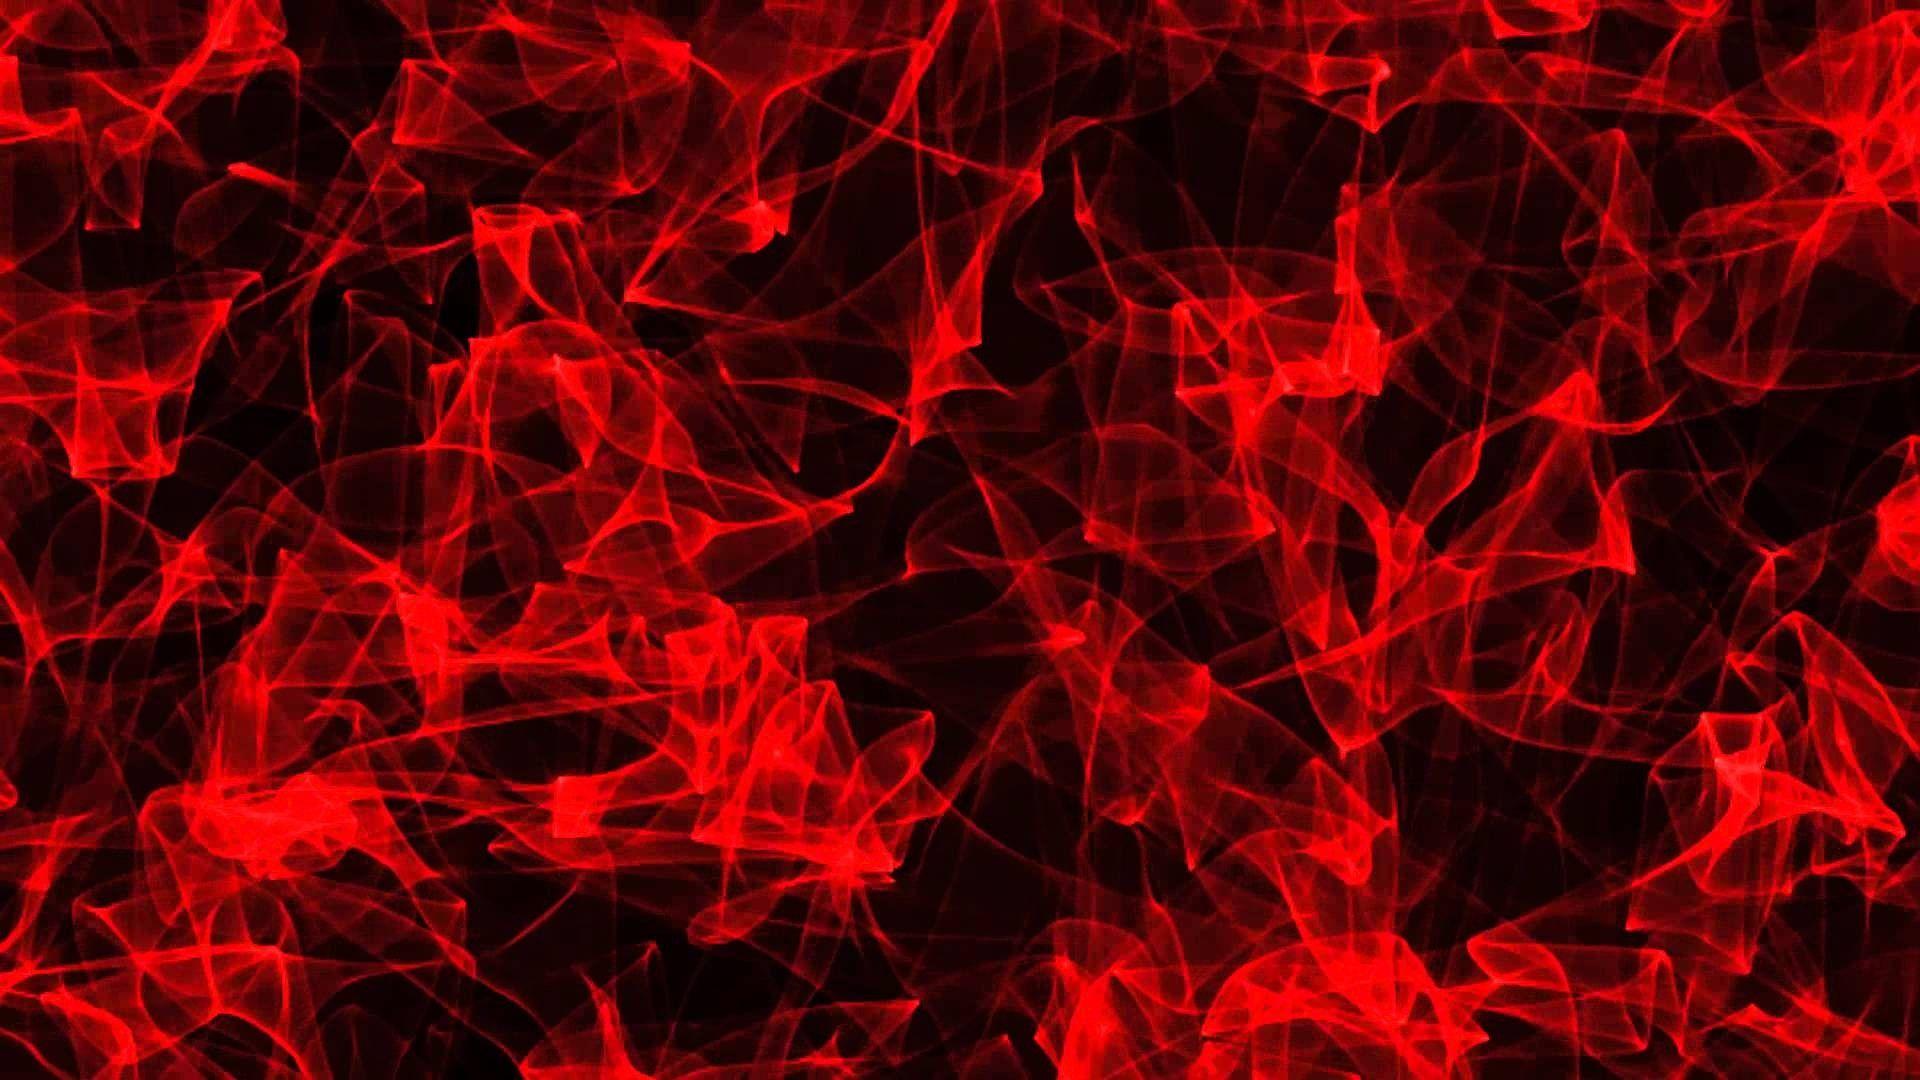 red grunge background 1920×1080 1. Background Check All